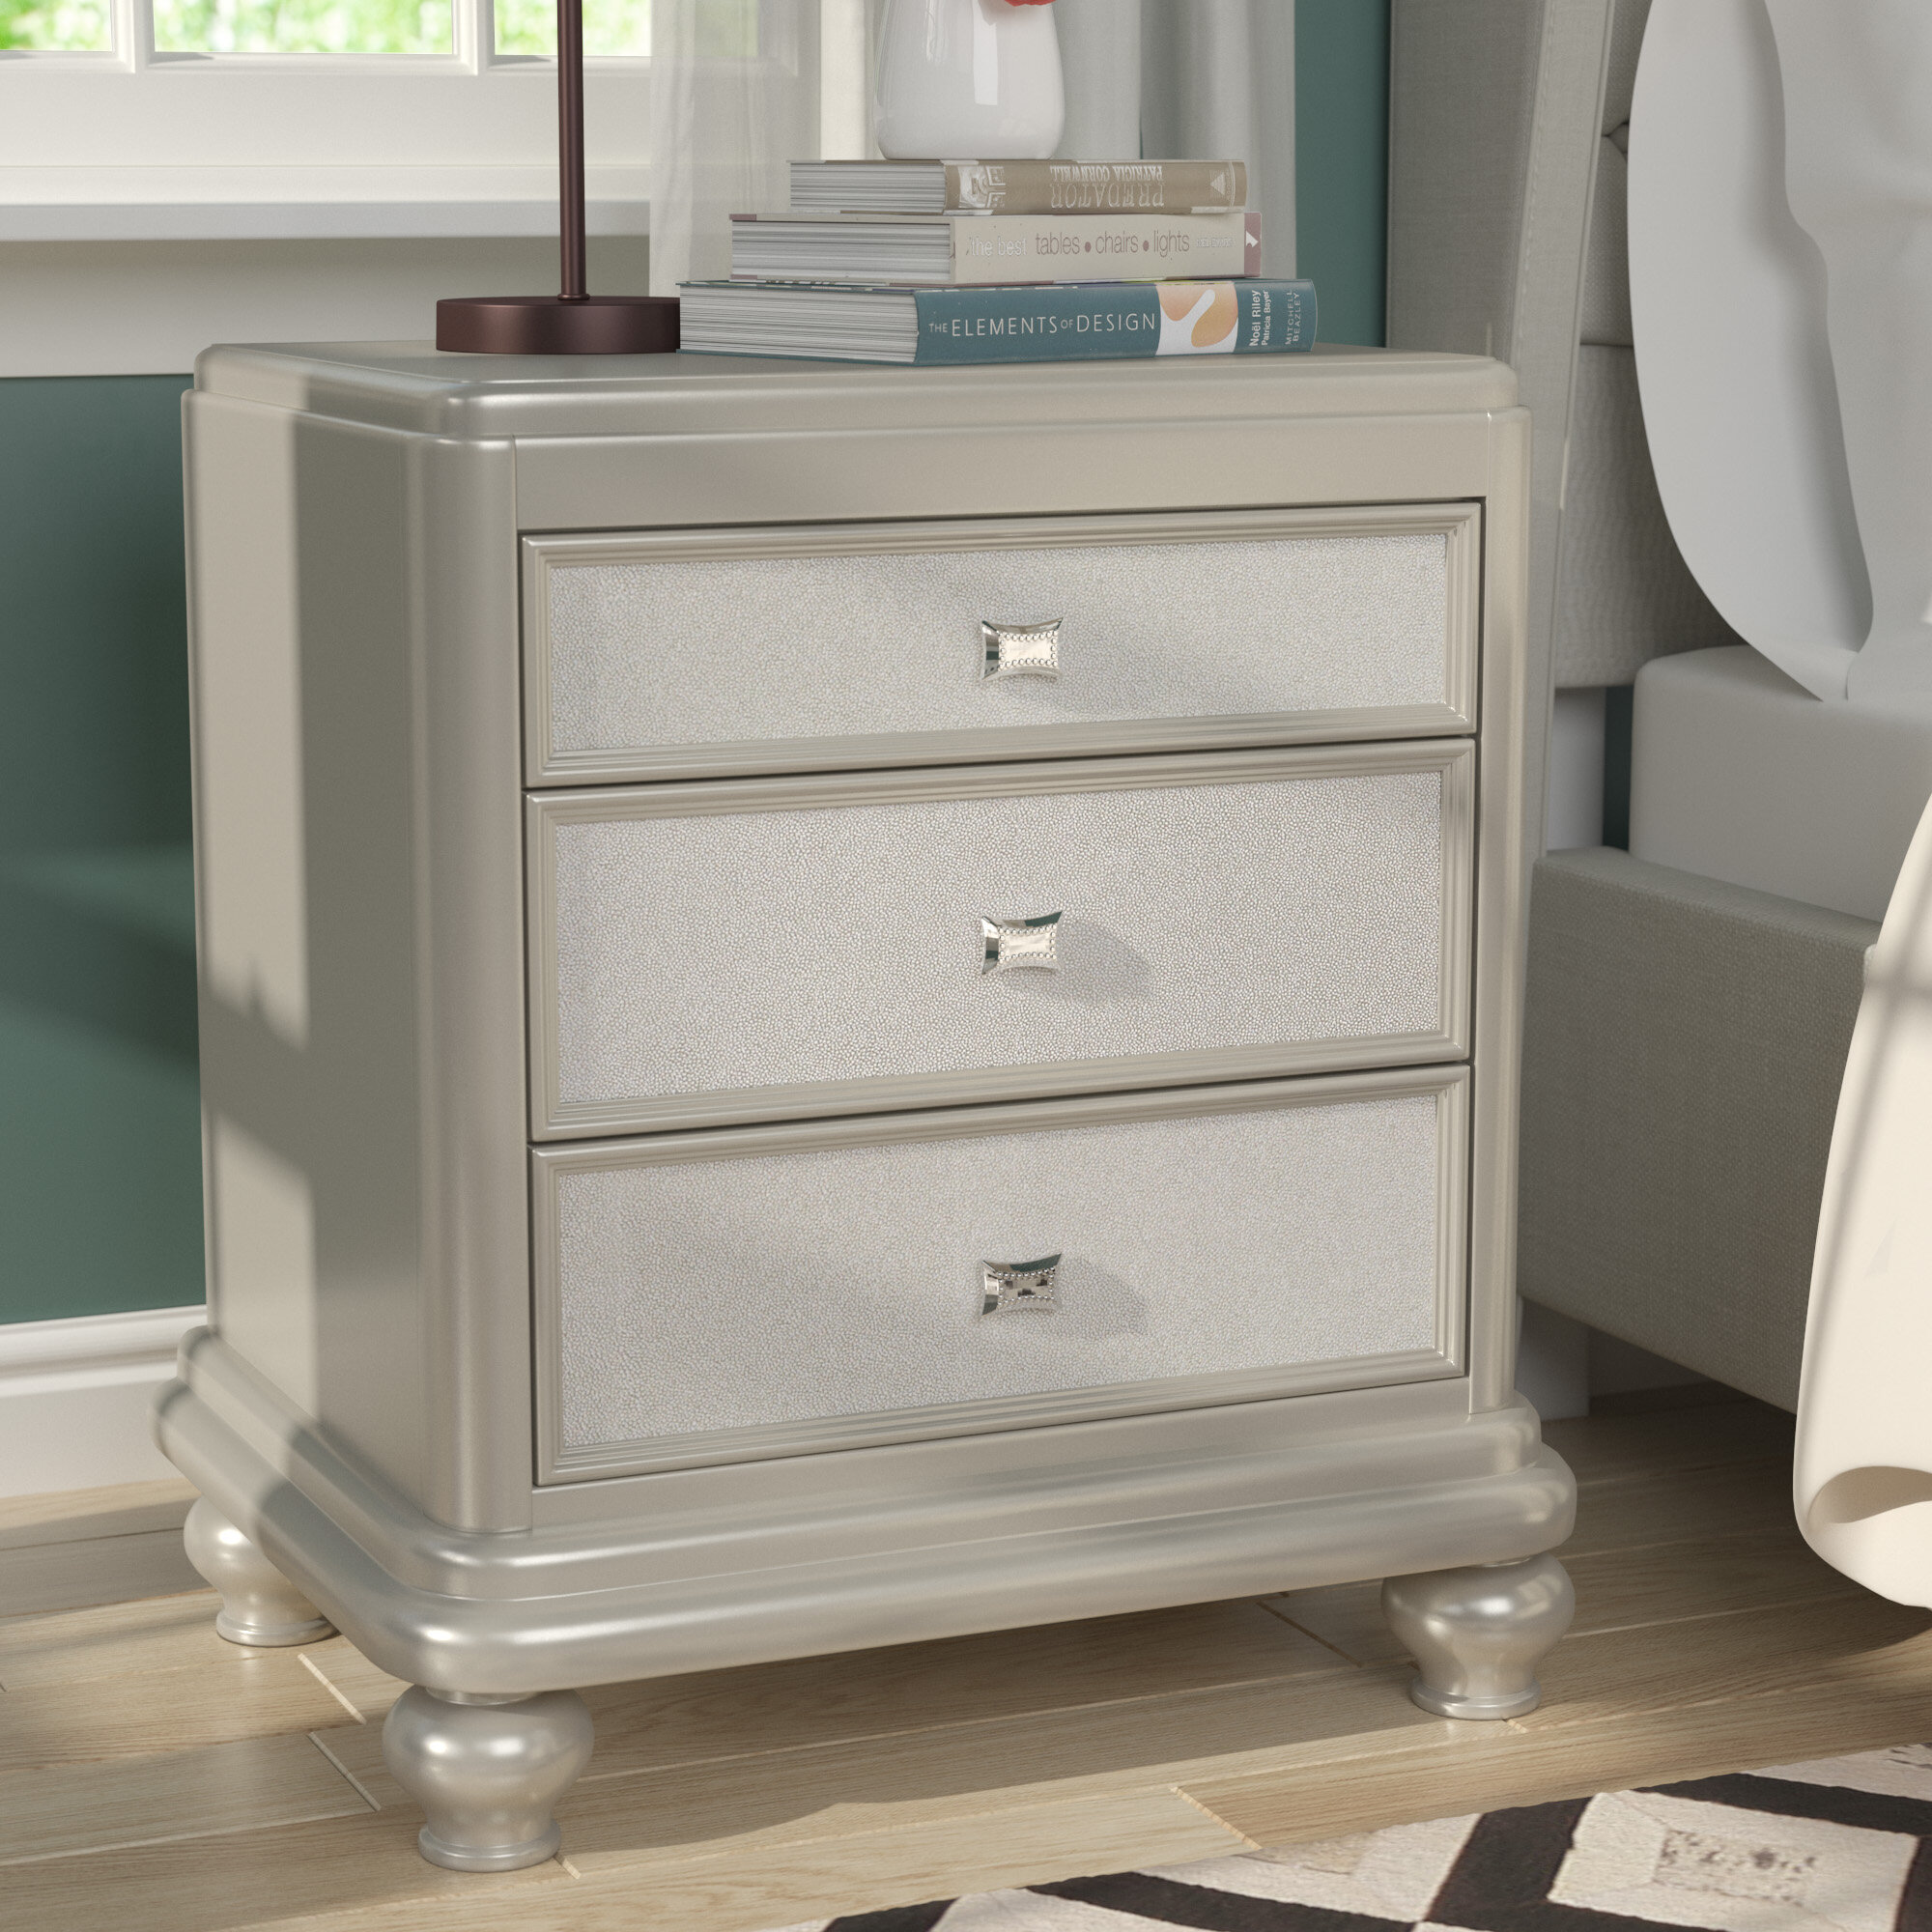 Willa Arlo Interiors Guillaume 3 Drawer Nightstand In Silver Reviews Wayfair